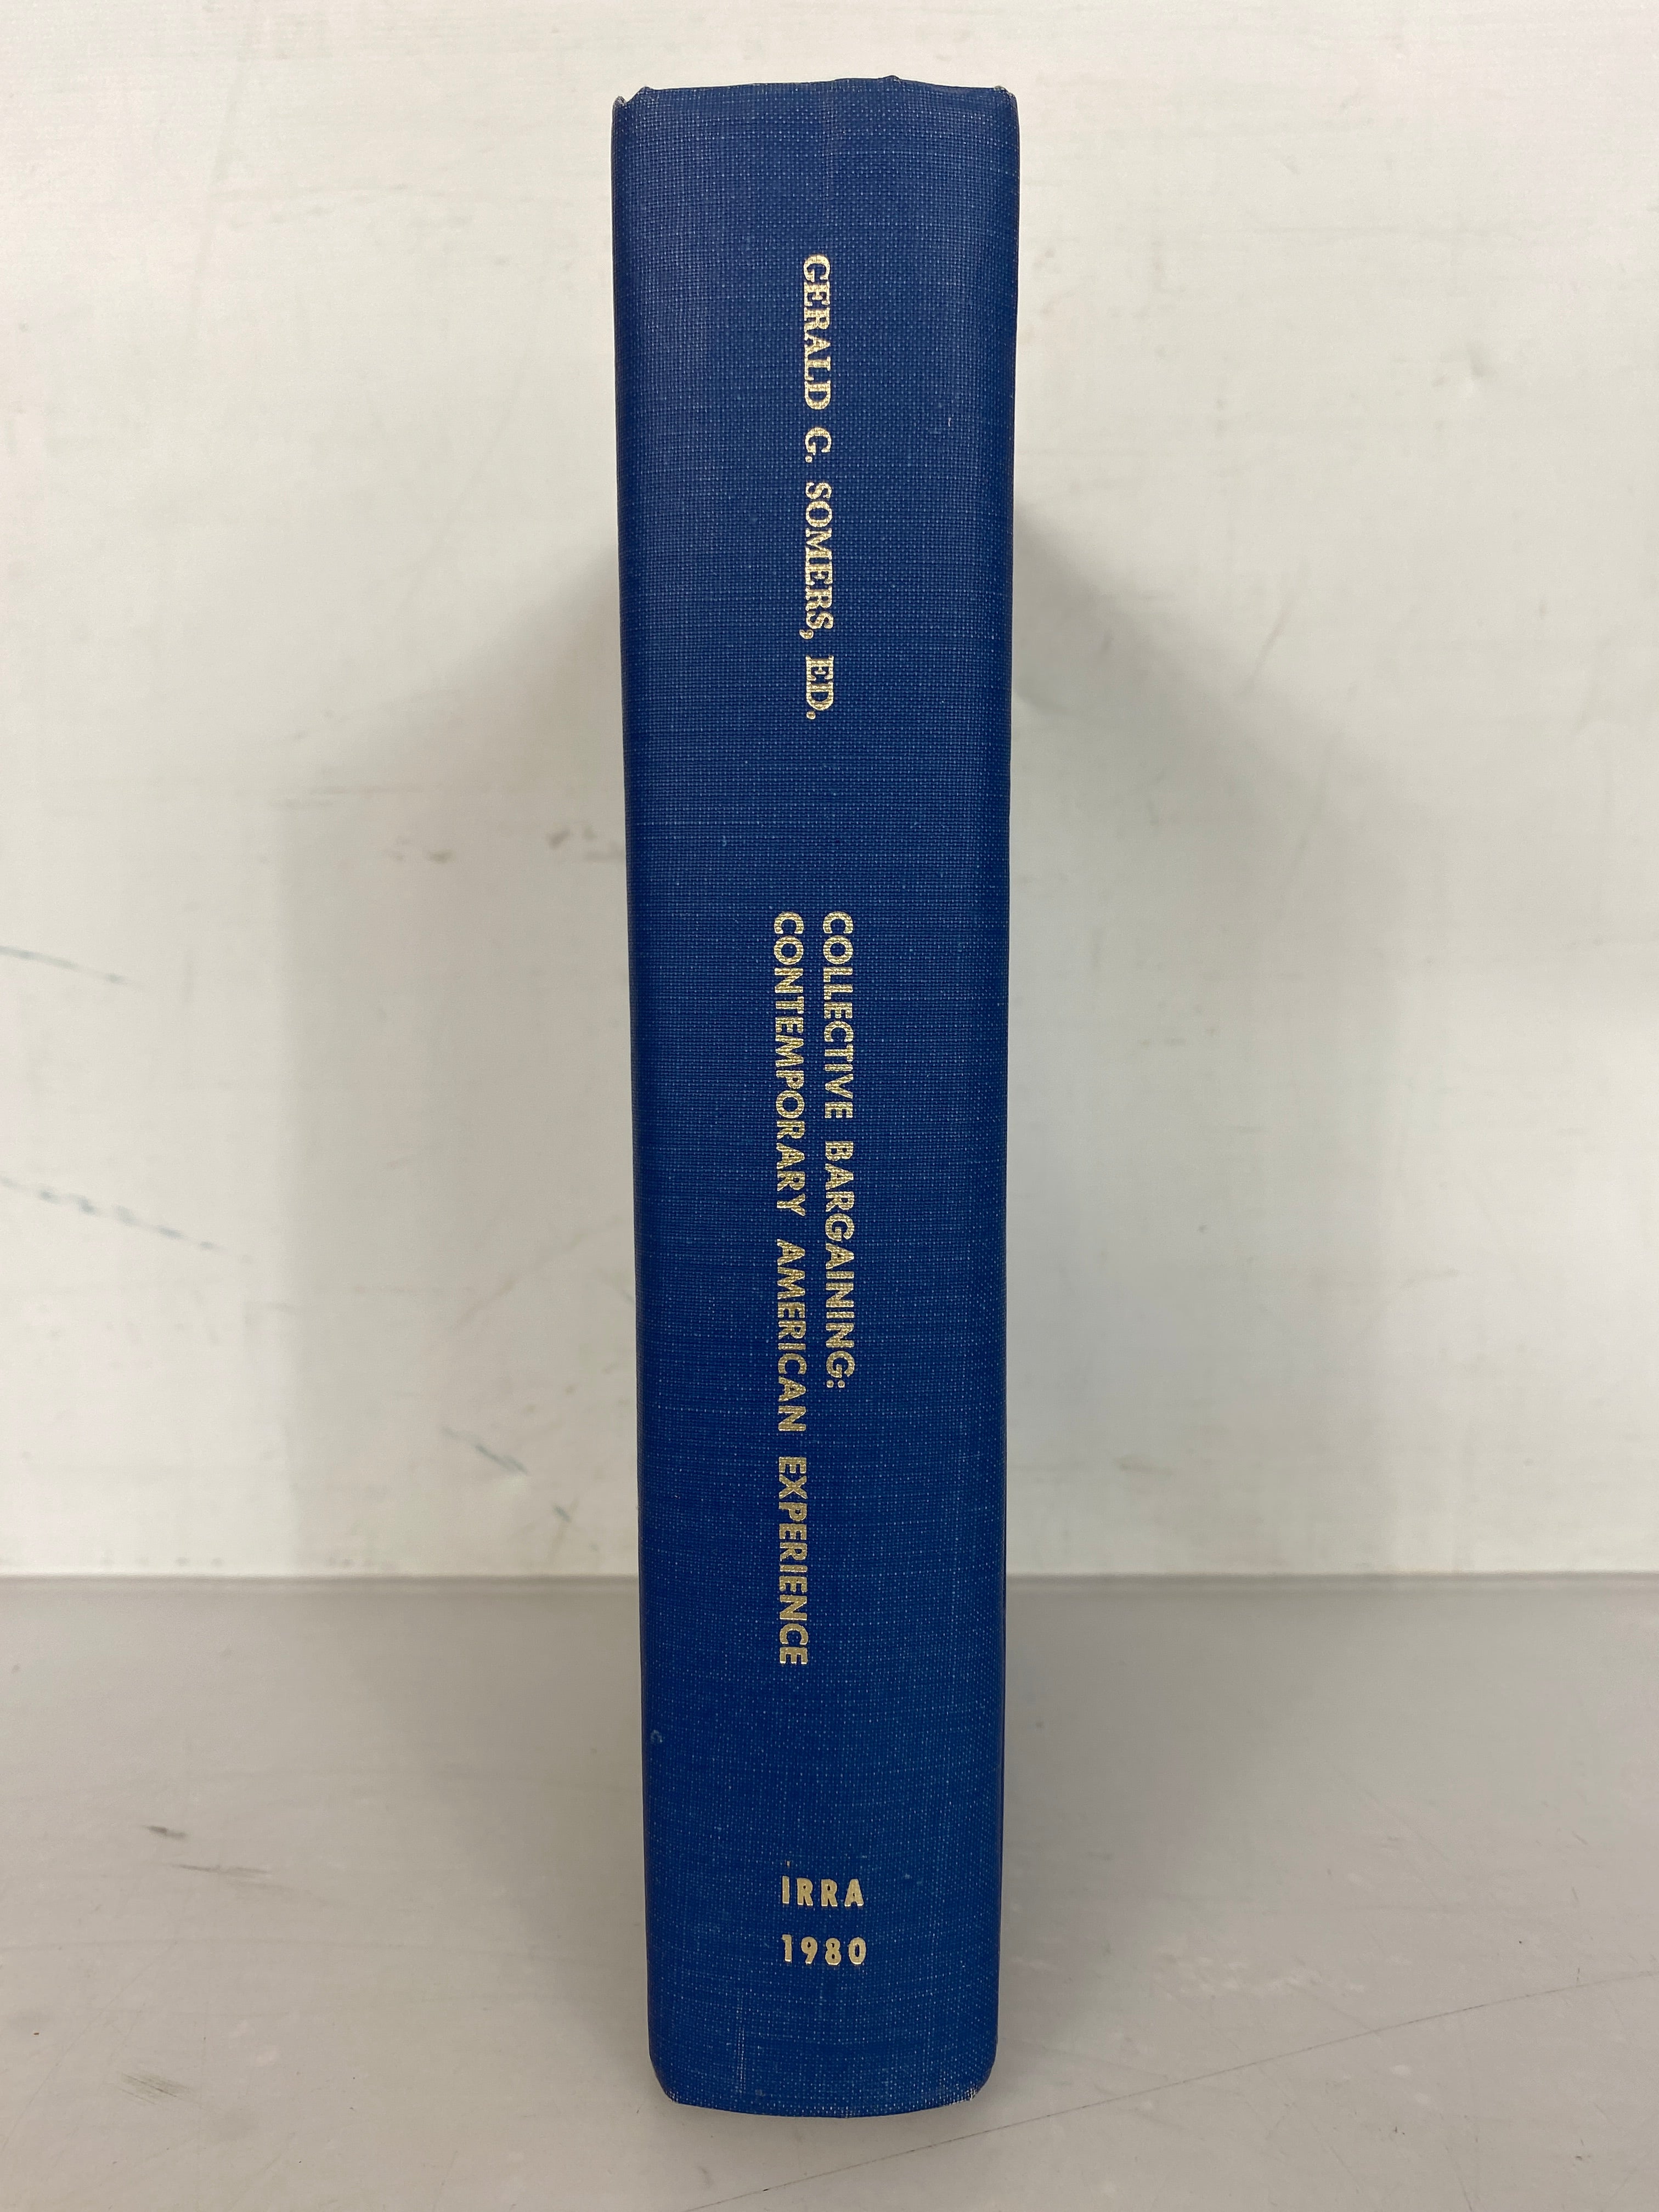 Lot of 2 Labor Relations Books: Coalition Bargaining 1969, Arbitration Cases in Public Employment 1969 HC SC